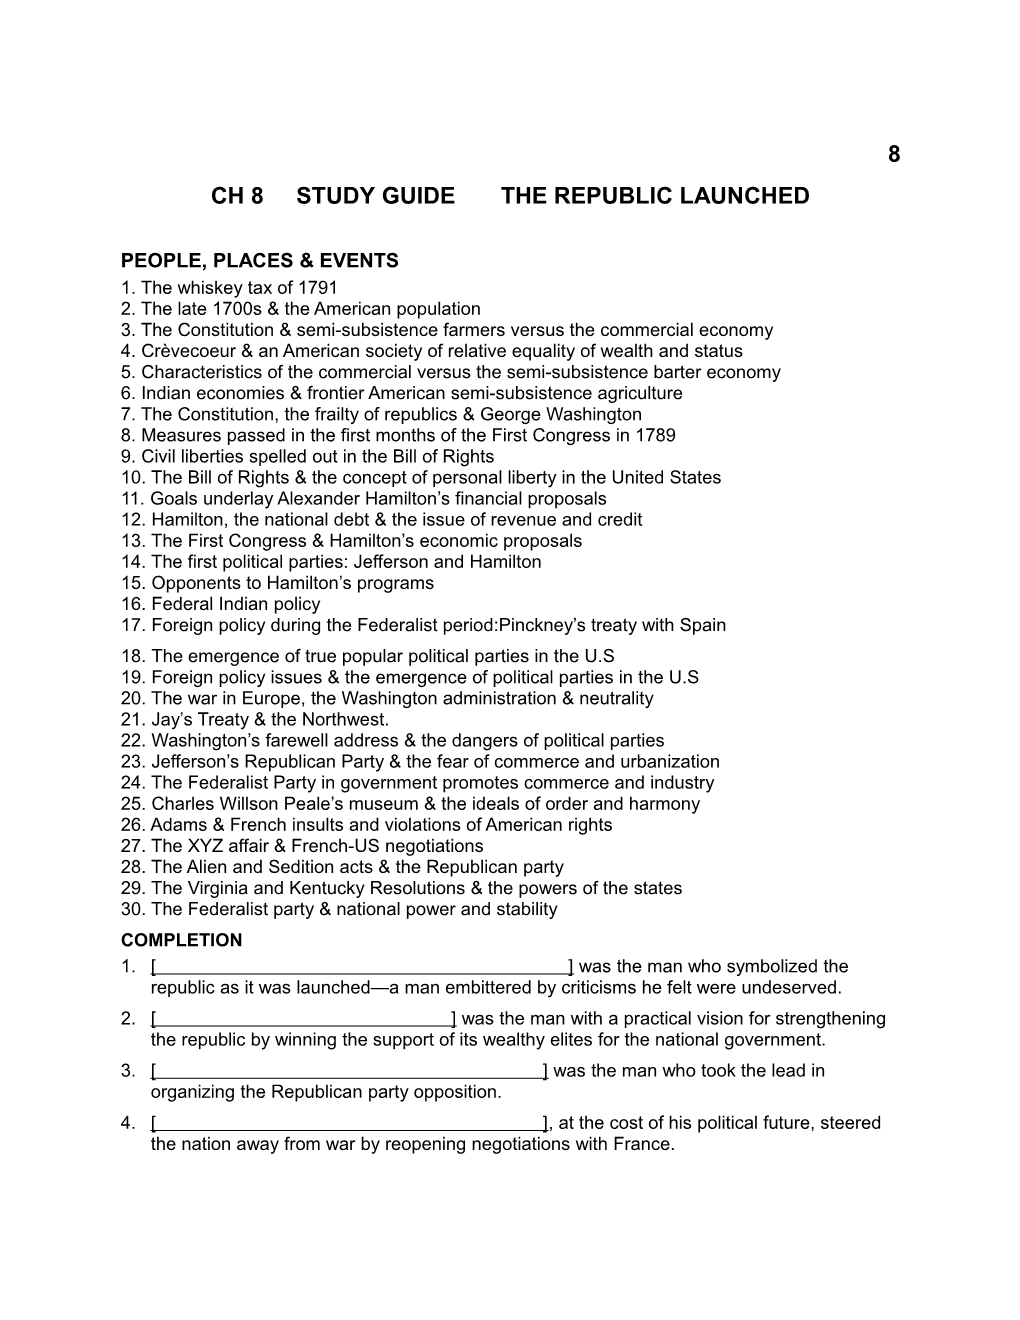 Ch 8 Study Guide the REPUBLIC LAUNCHED